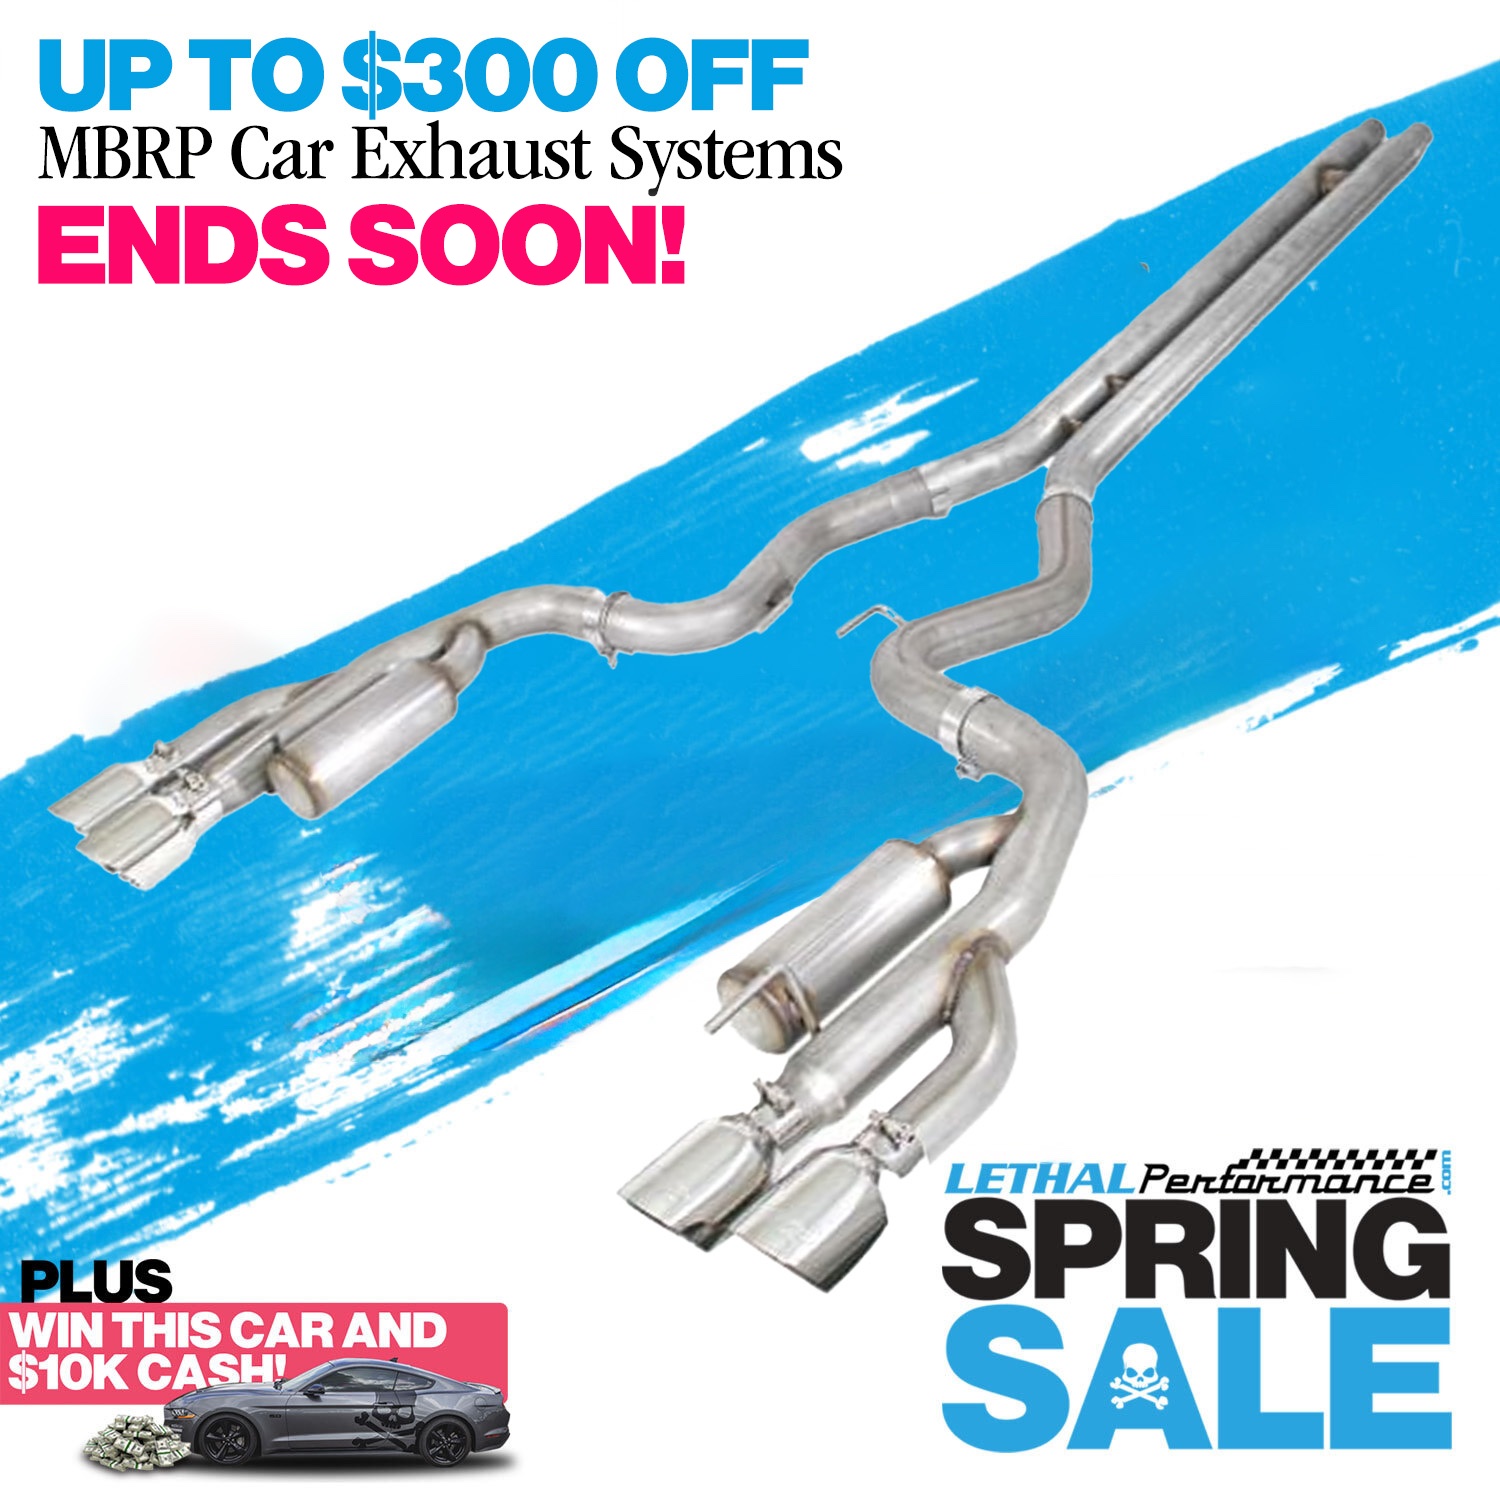 S650 Mustang Spring SALE has SPRUNG here at Lethal Performance!! springsale_mbrp mustang endsoon